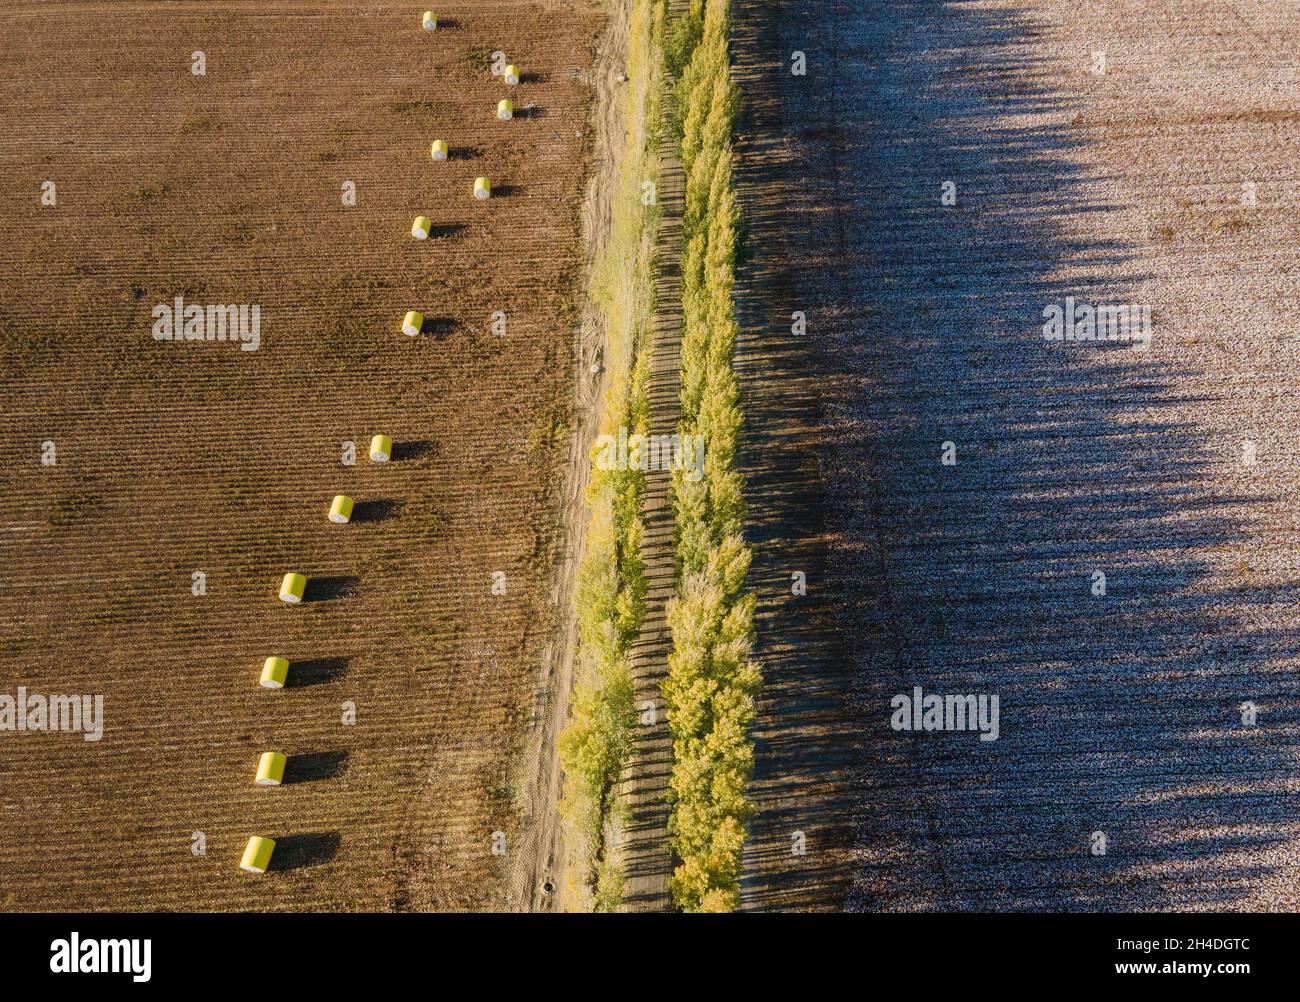 (211102) -- SHAWAN, Nov. 2, 2021 (Xinhua) -- Aerial photo taken above Lu Gaolin's cotton fields on Oct. 24, 2021 shows harvested packed cotton on the left field, and cotton to be harvested on the right field in Shawan City, northwest China's Xinjiang Uygur Autonomous Region. Lu Gaolin, a cotton farmer, is 56 years old and lives in Shawan City of Xinjiang Uygur Autonomous Region.  The cotton harvest season in Xinjiang, China's largest cotton-producing region, will last until mid-November this year, with the output expected to reach 5.2 million tonnes. The region has contributed nearly 90 percen Stock Photo